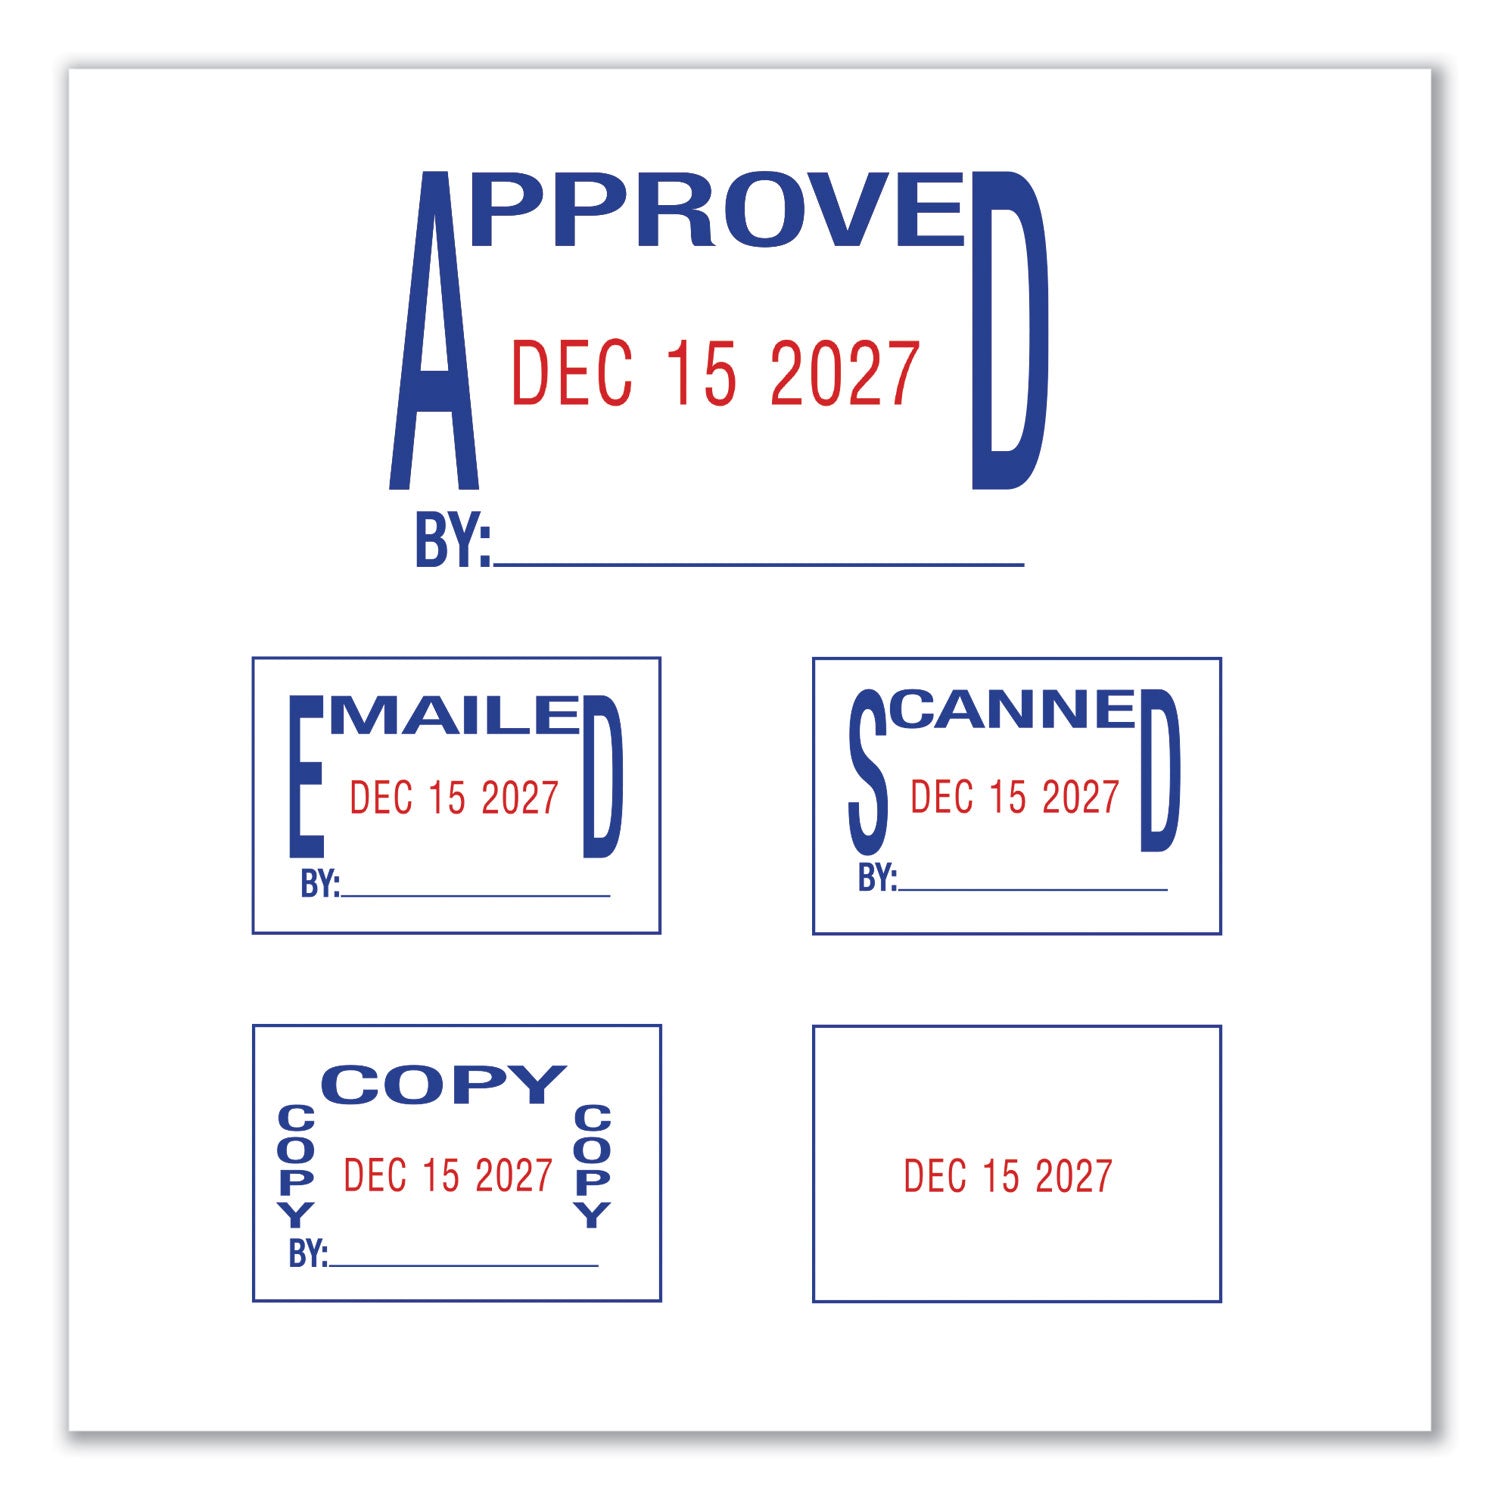 printy-economy-5-in-1-date-stamp-self-inking-163-x-1-blue-red_usse4756 - 2